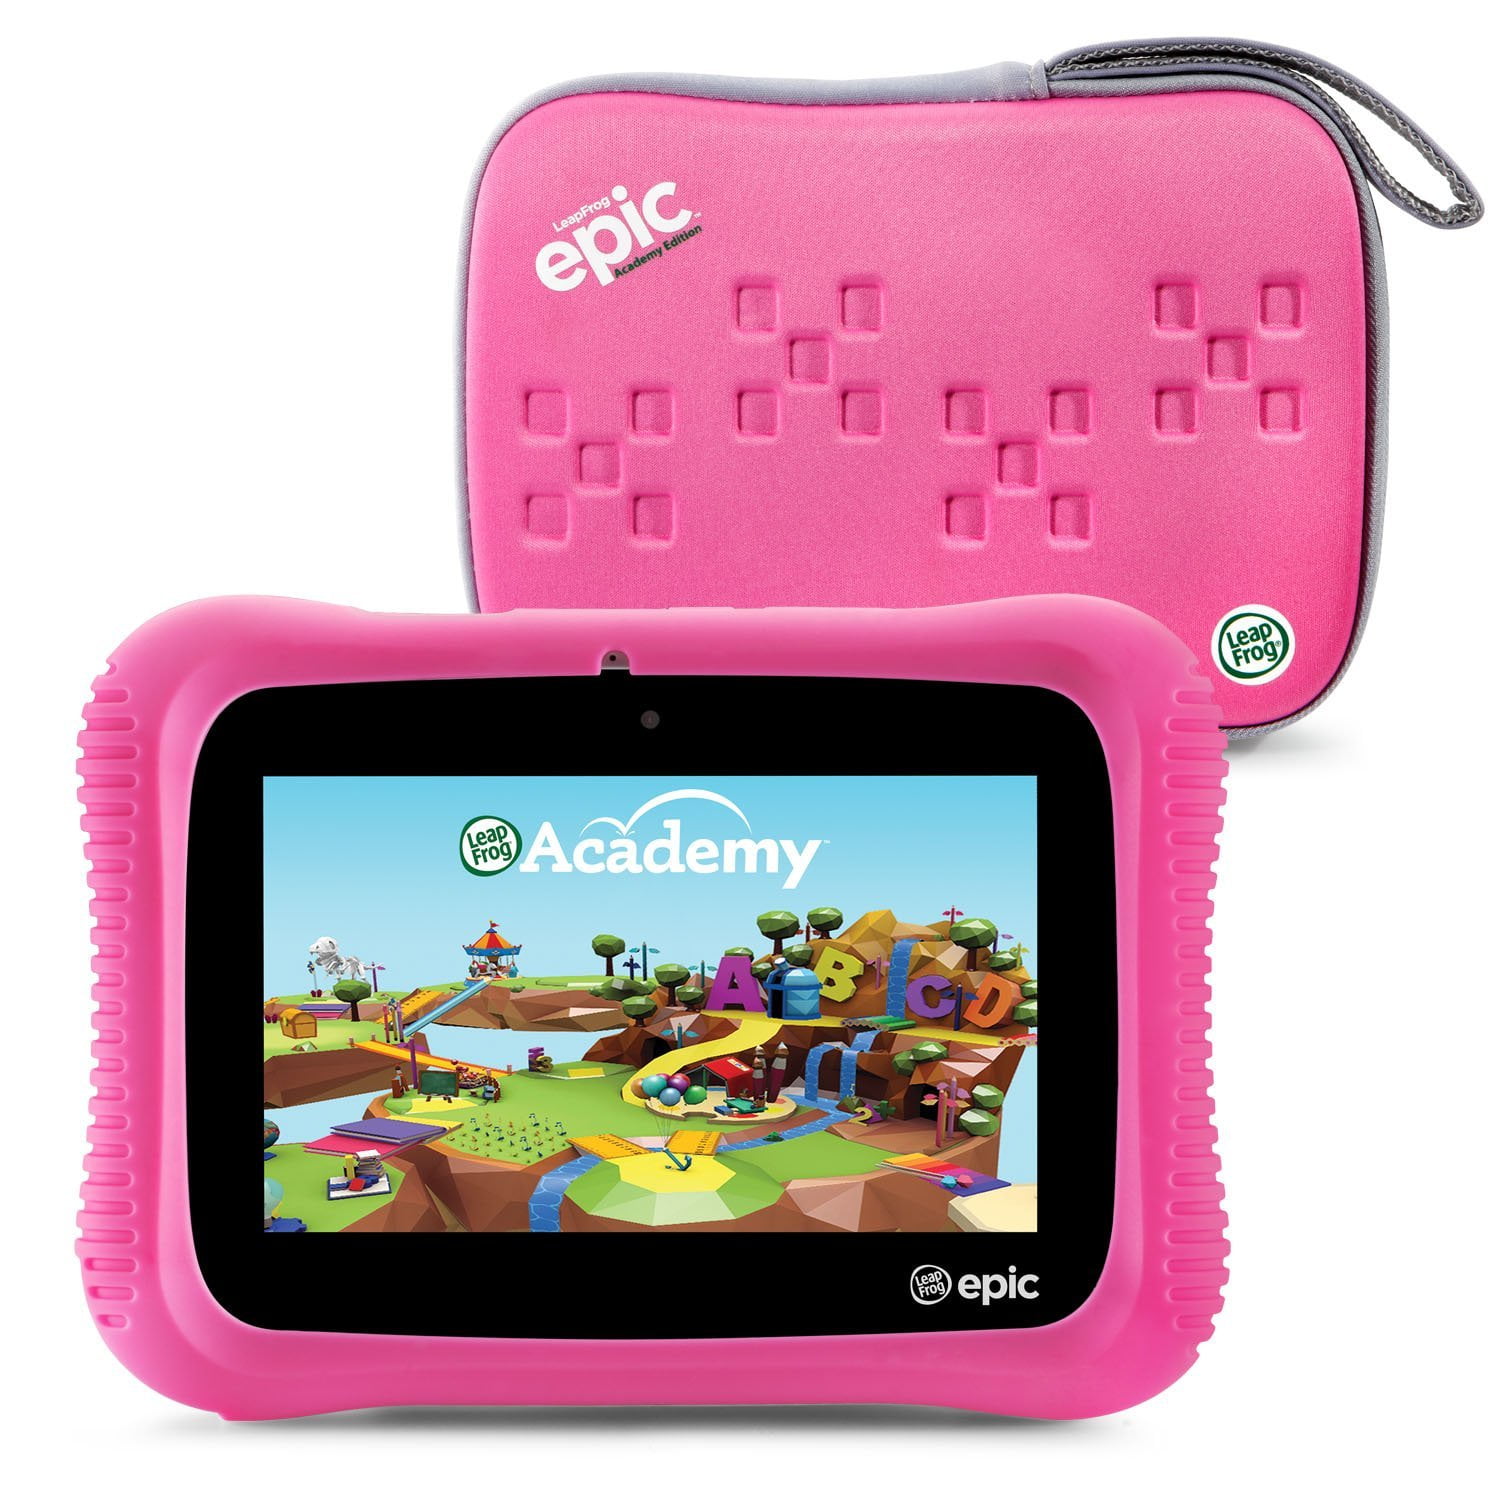 LeapFrog Epic 7 inch 16GB Tablet Academy Edition for sale online 